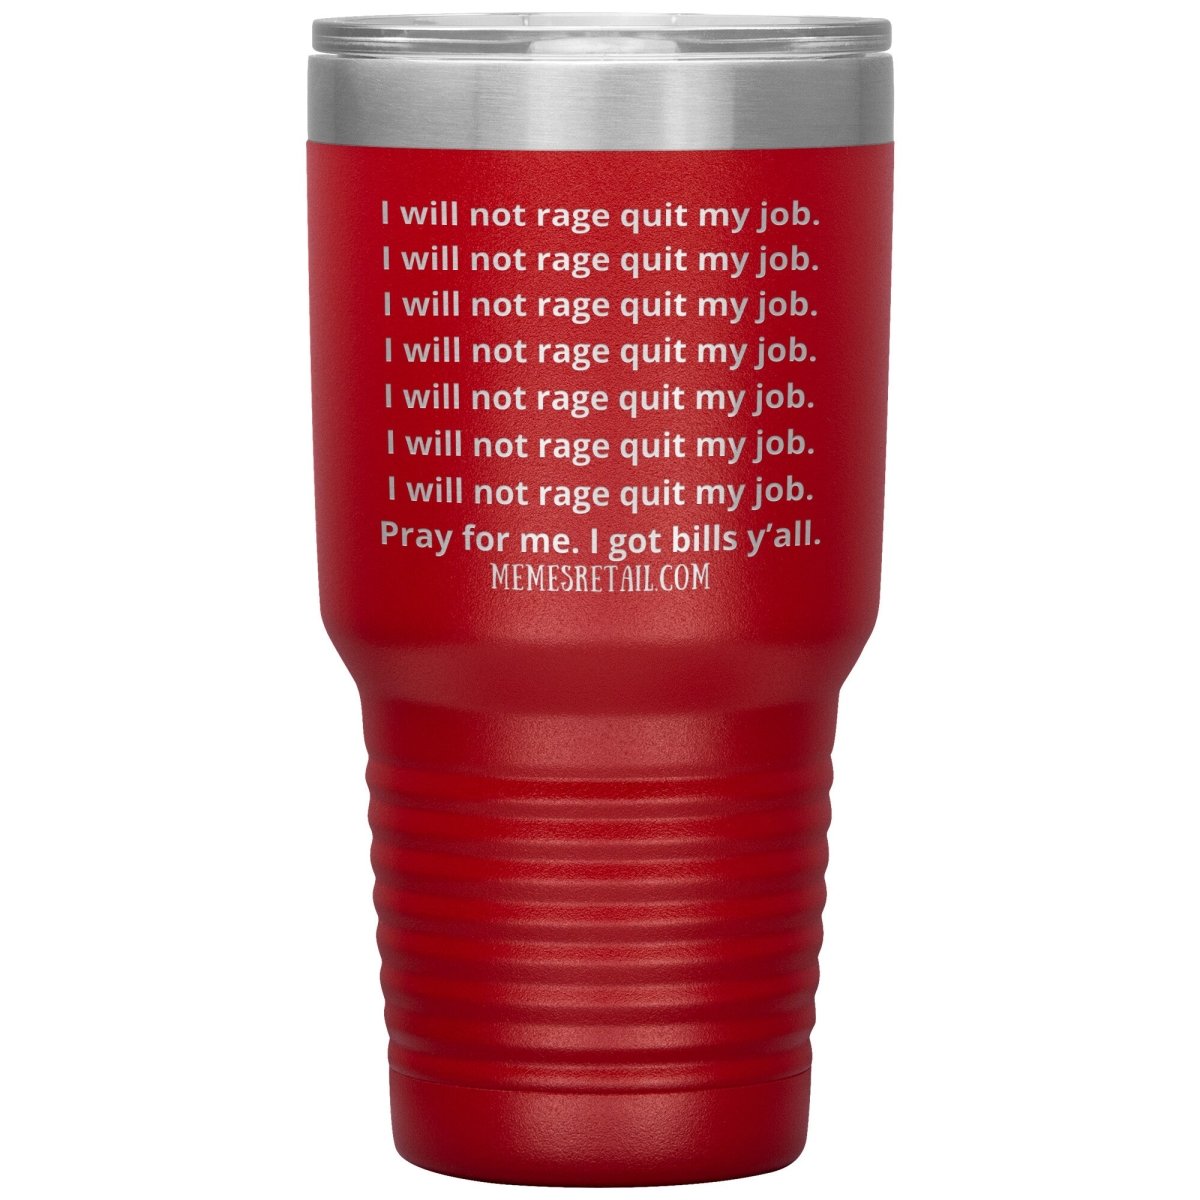 I will not rage quit my job Tumblers, 30oz Insulated Tumbler / Red - MemesRetail.com